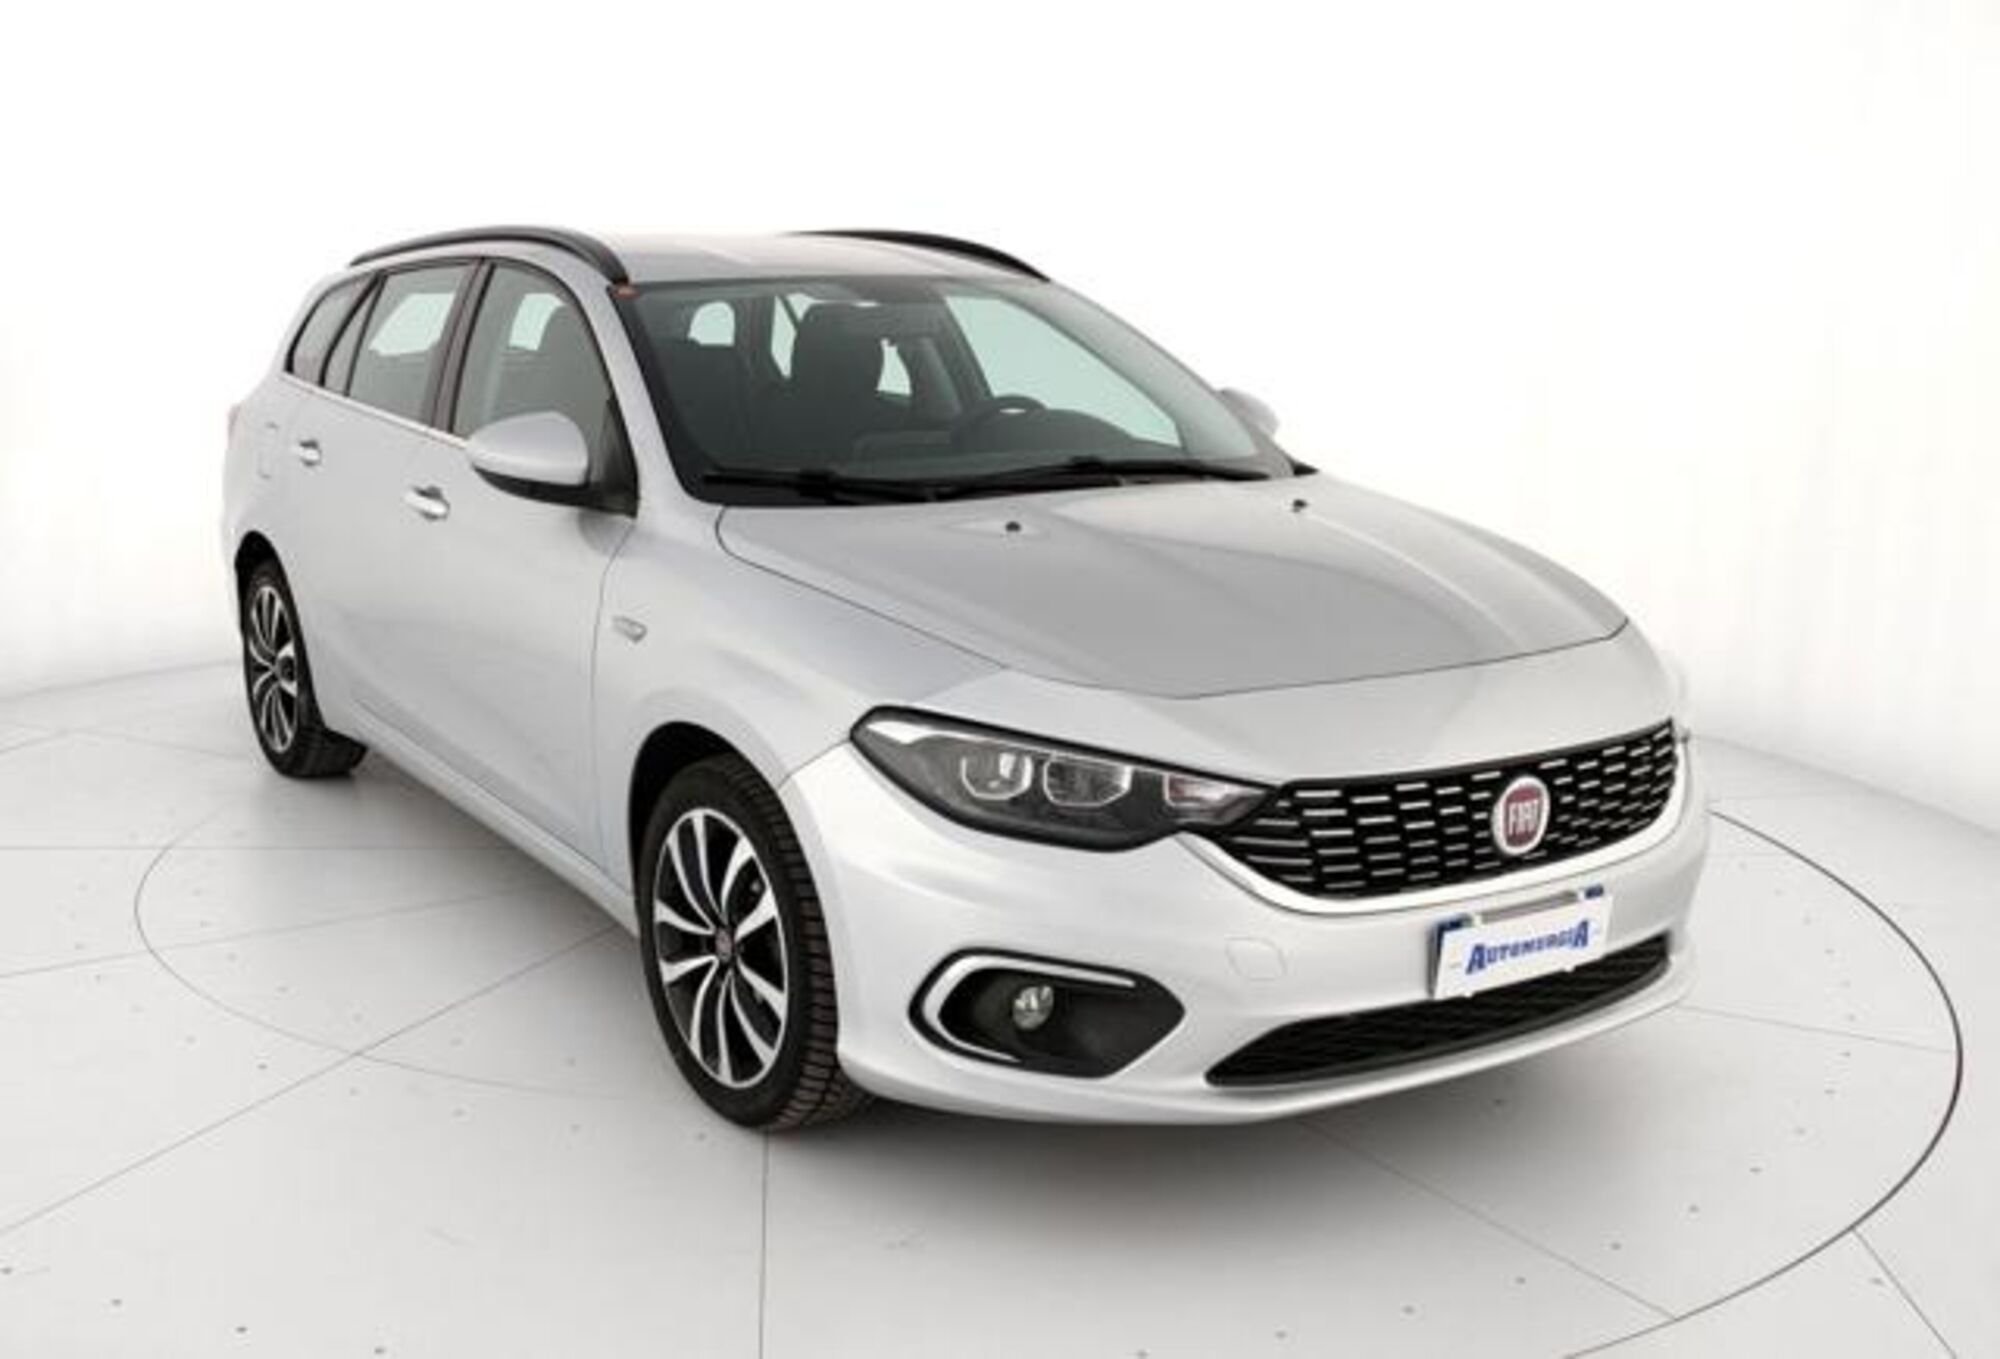 Fiat Tipo Station Wagon Tipo 1.6 Mjt S&S SW Lounge usato